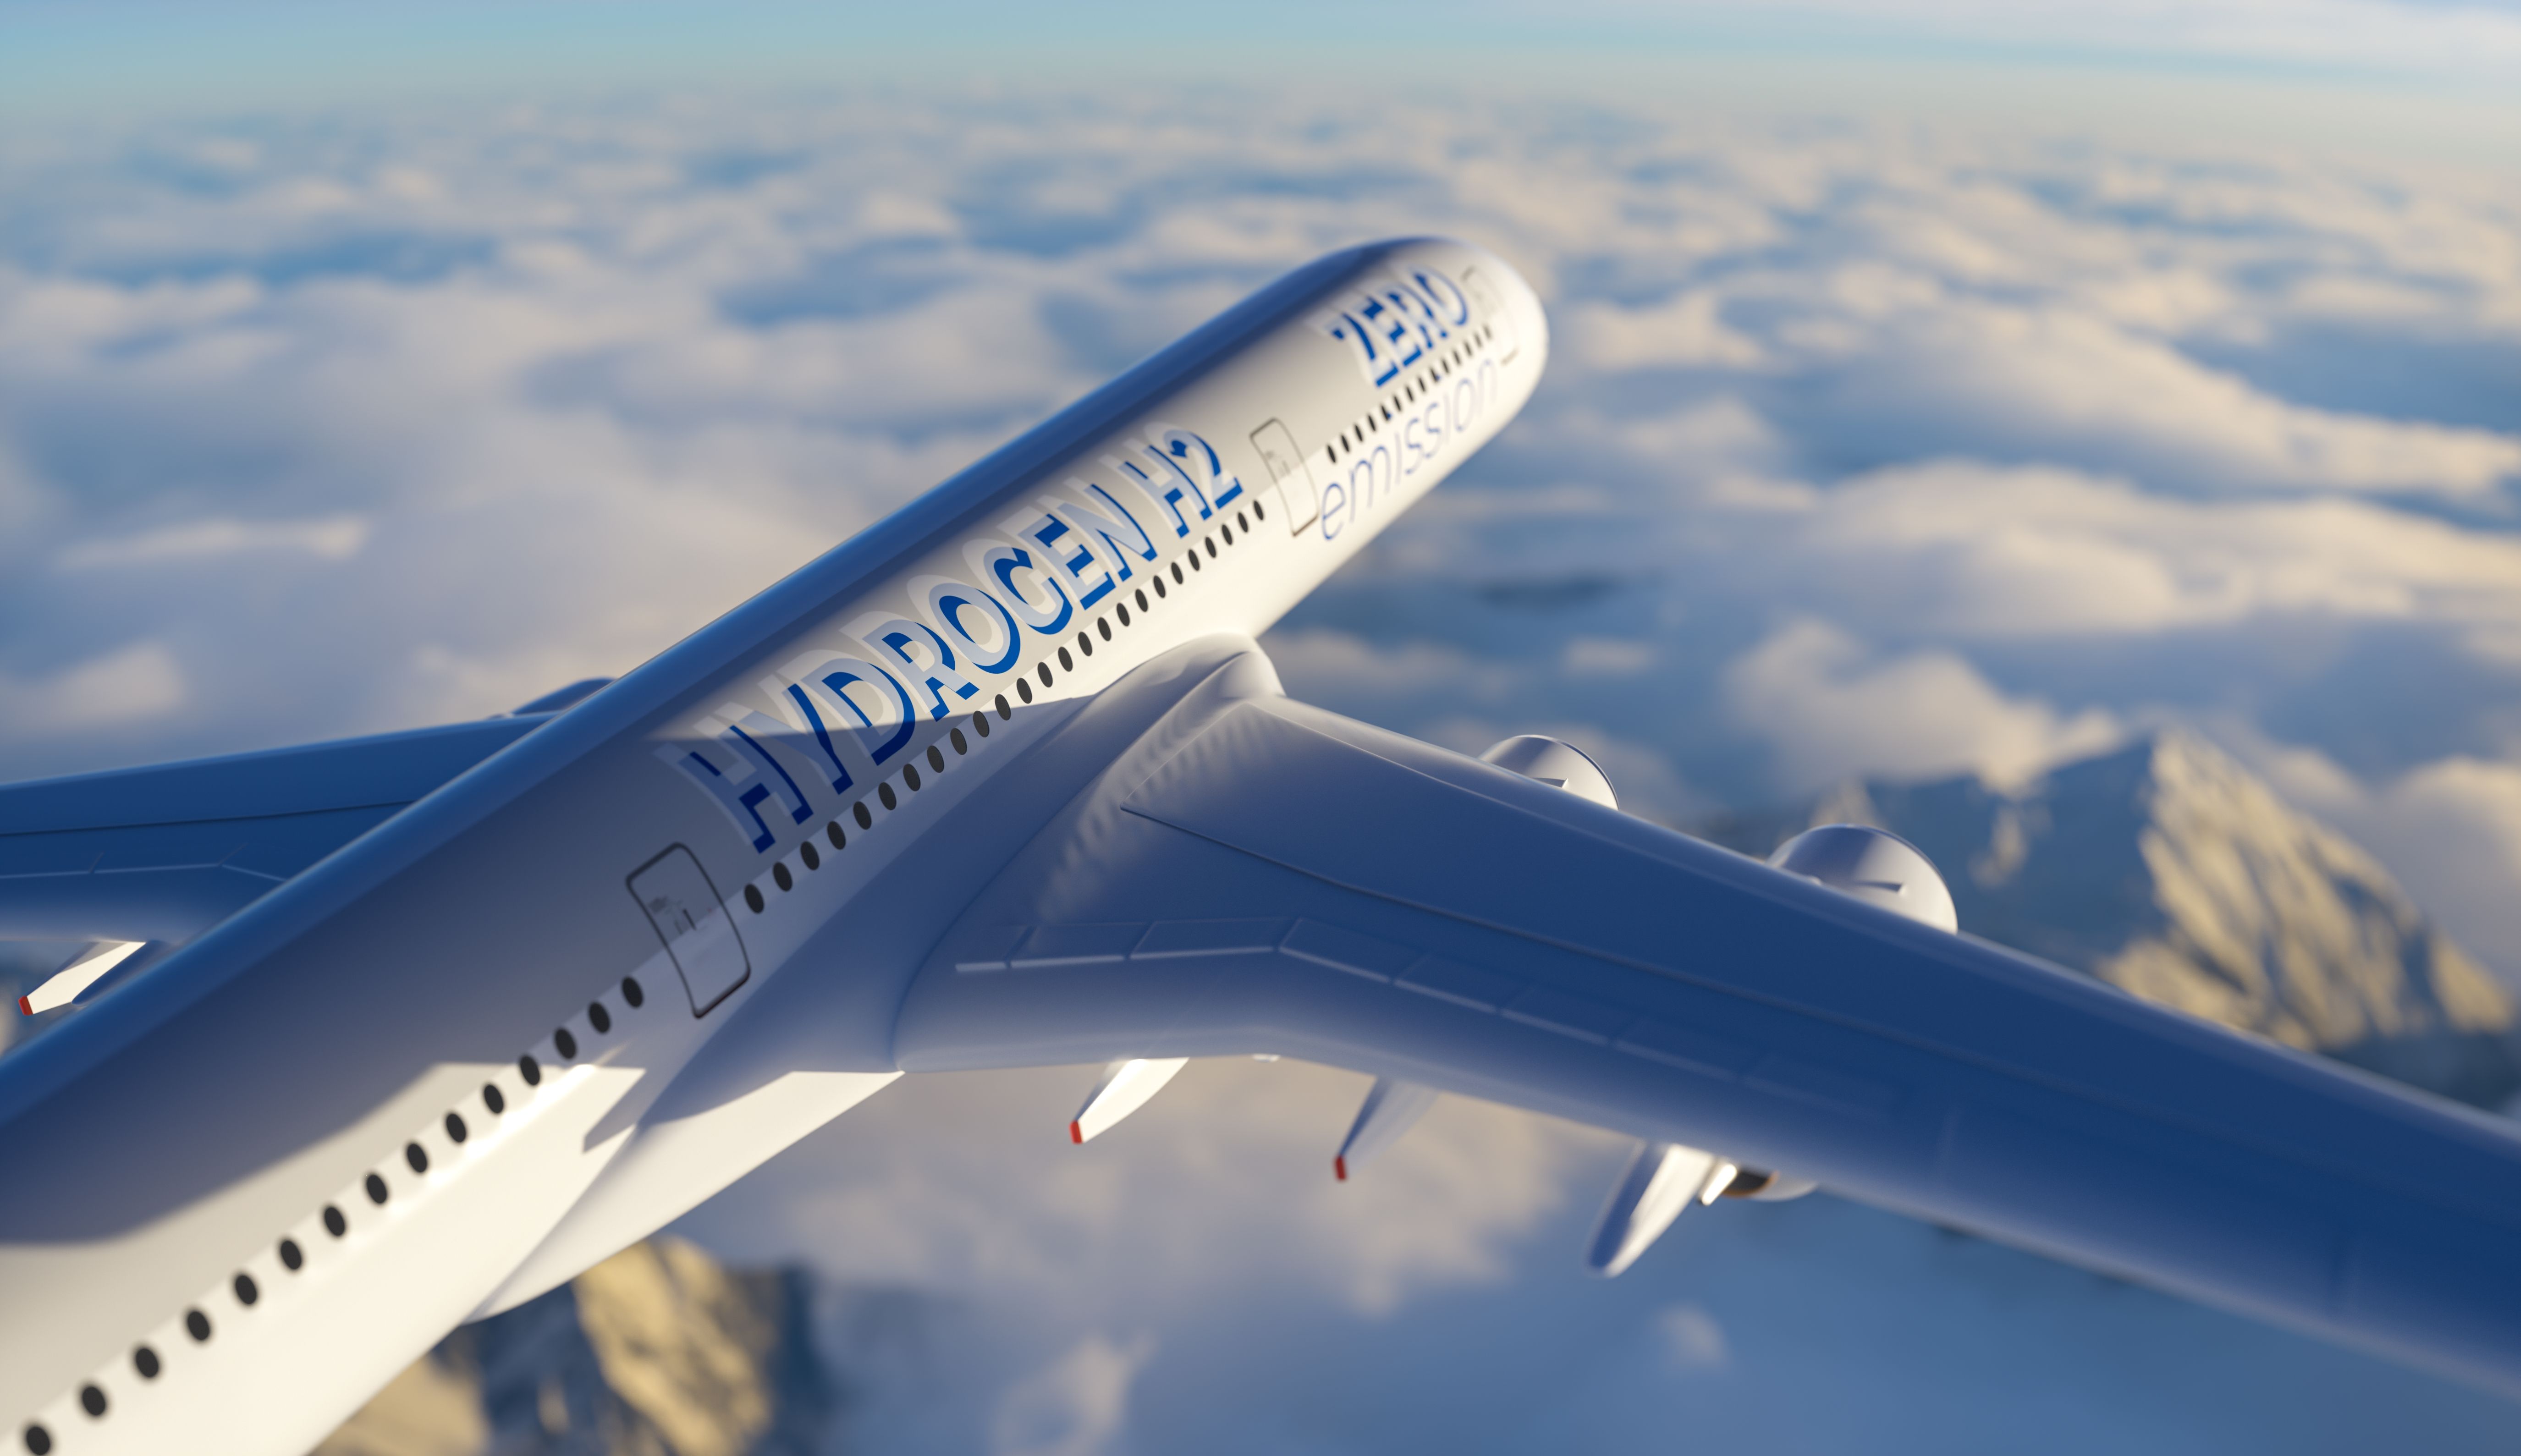 Hydrogen filled H2 Airplane flying in the sky - future H2 energy concept. 3d rendering